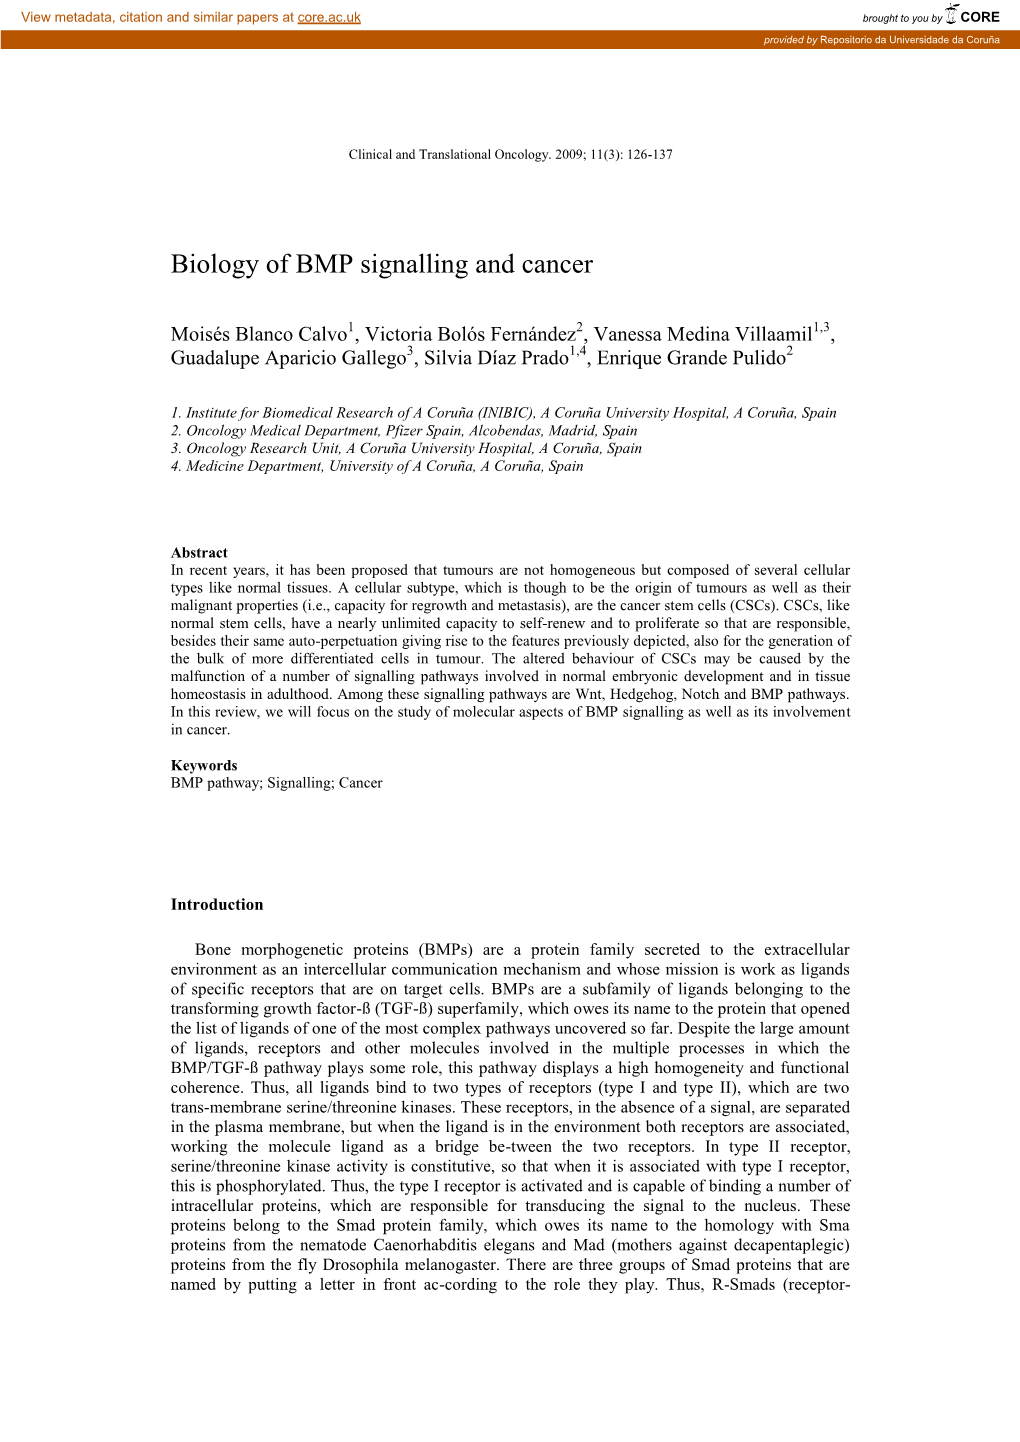 Biology of BMP Signalling and Cancer